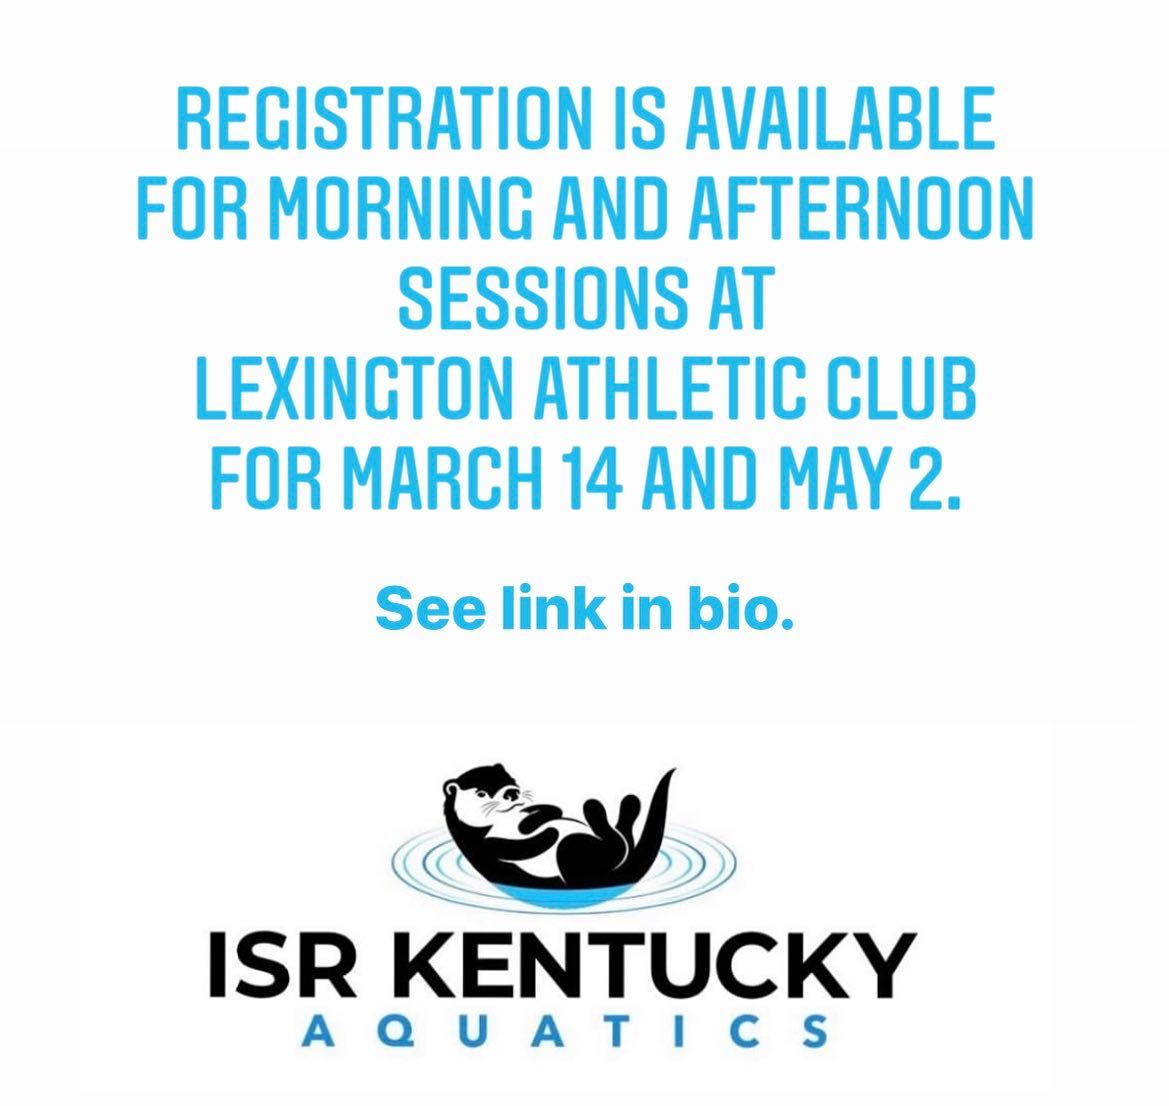 Registration is OPEN for both morning and afternoon sessions at Lexington Athletic Club for March 14 and May 2.

These spring sessions always fill very quickly so sign-up today! Summer will thankfully be here before we know it and you’ll want your little one to feel confident in the water. 

Sign-up today! See link in bio to visit our website!